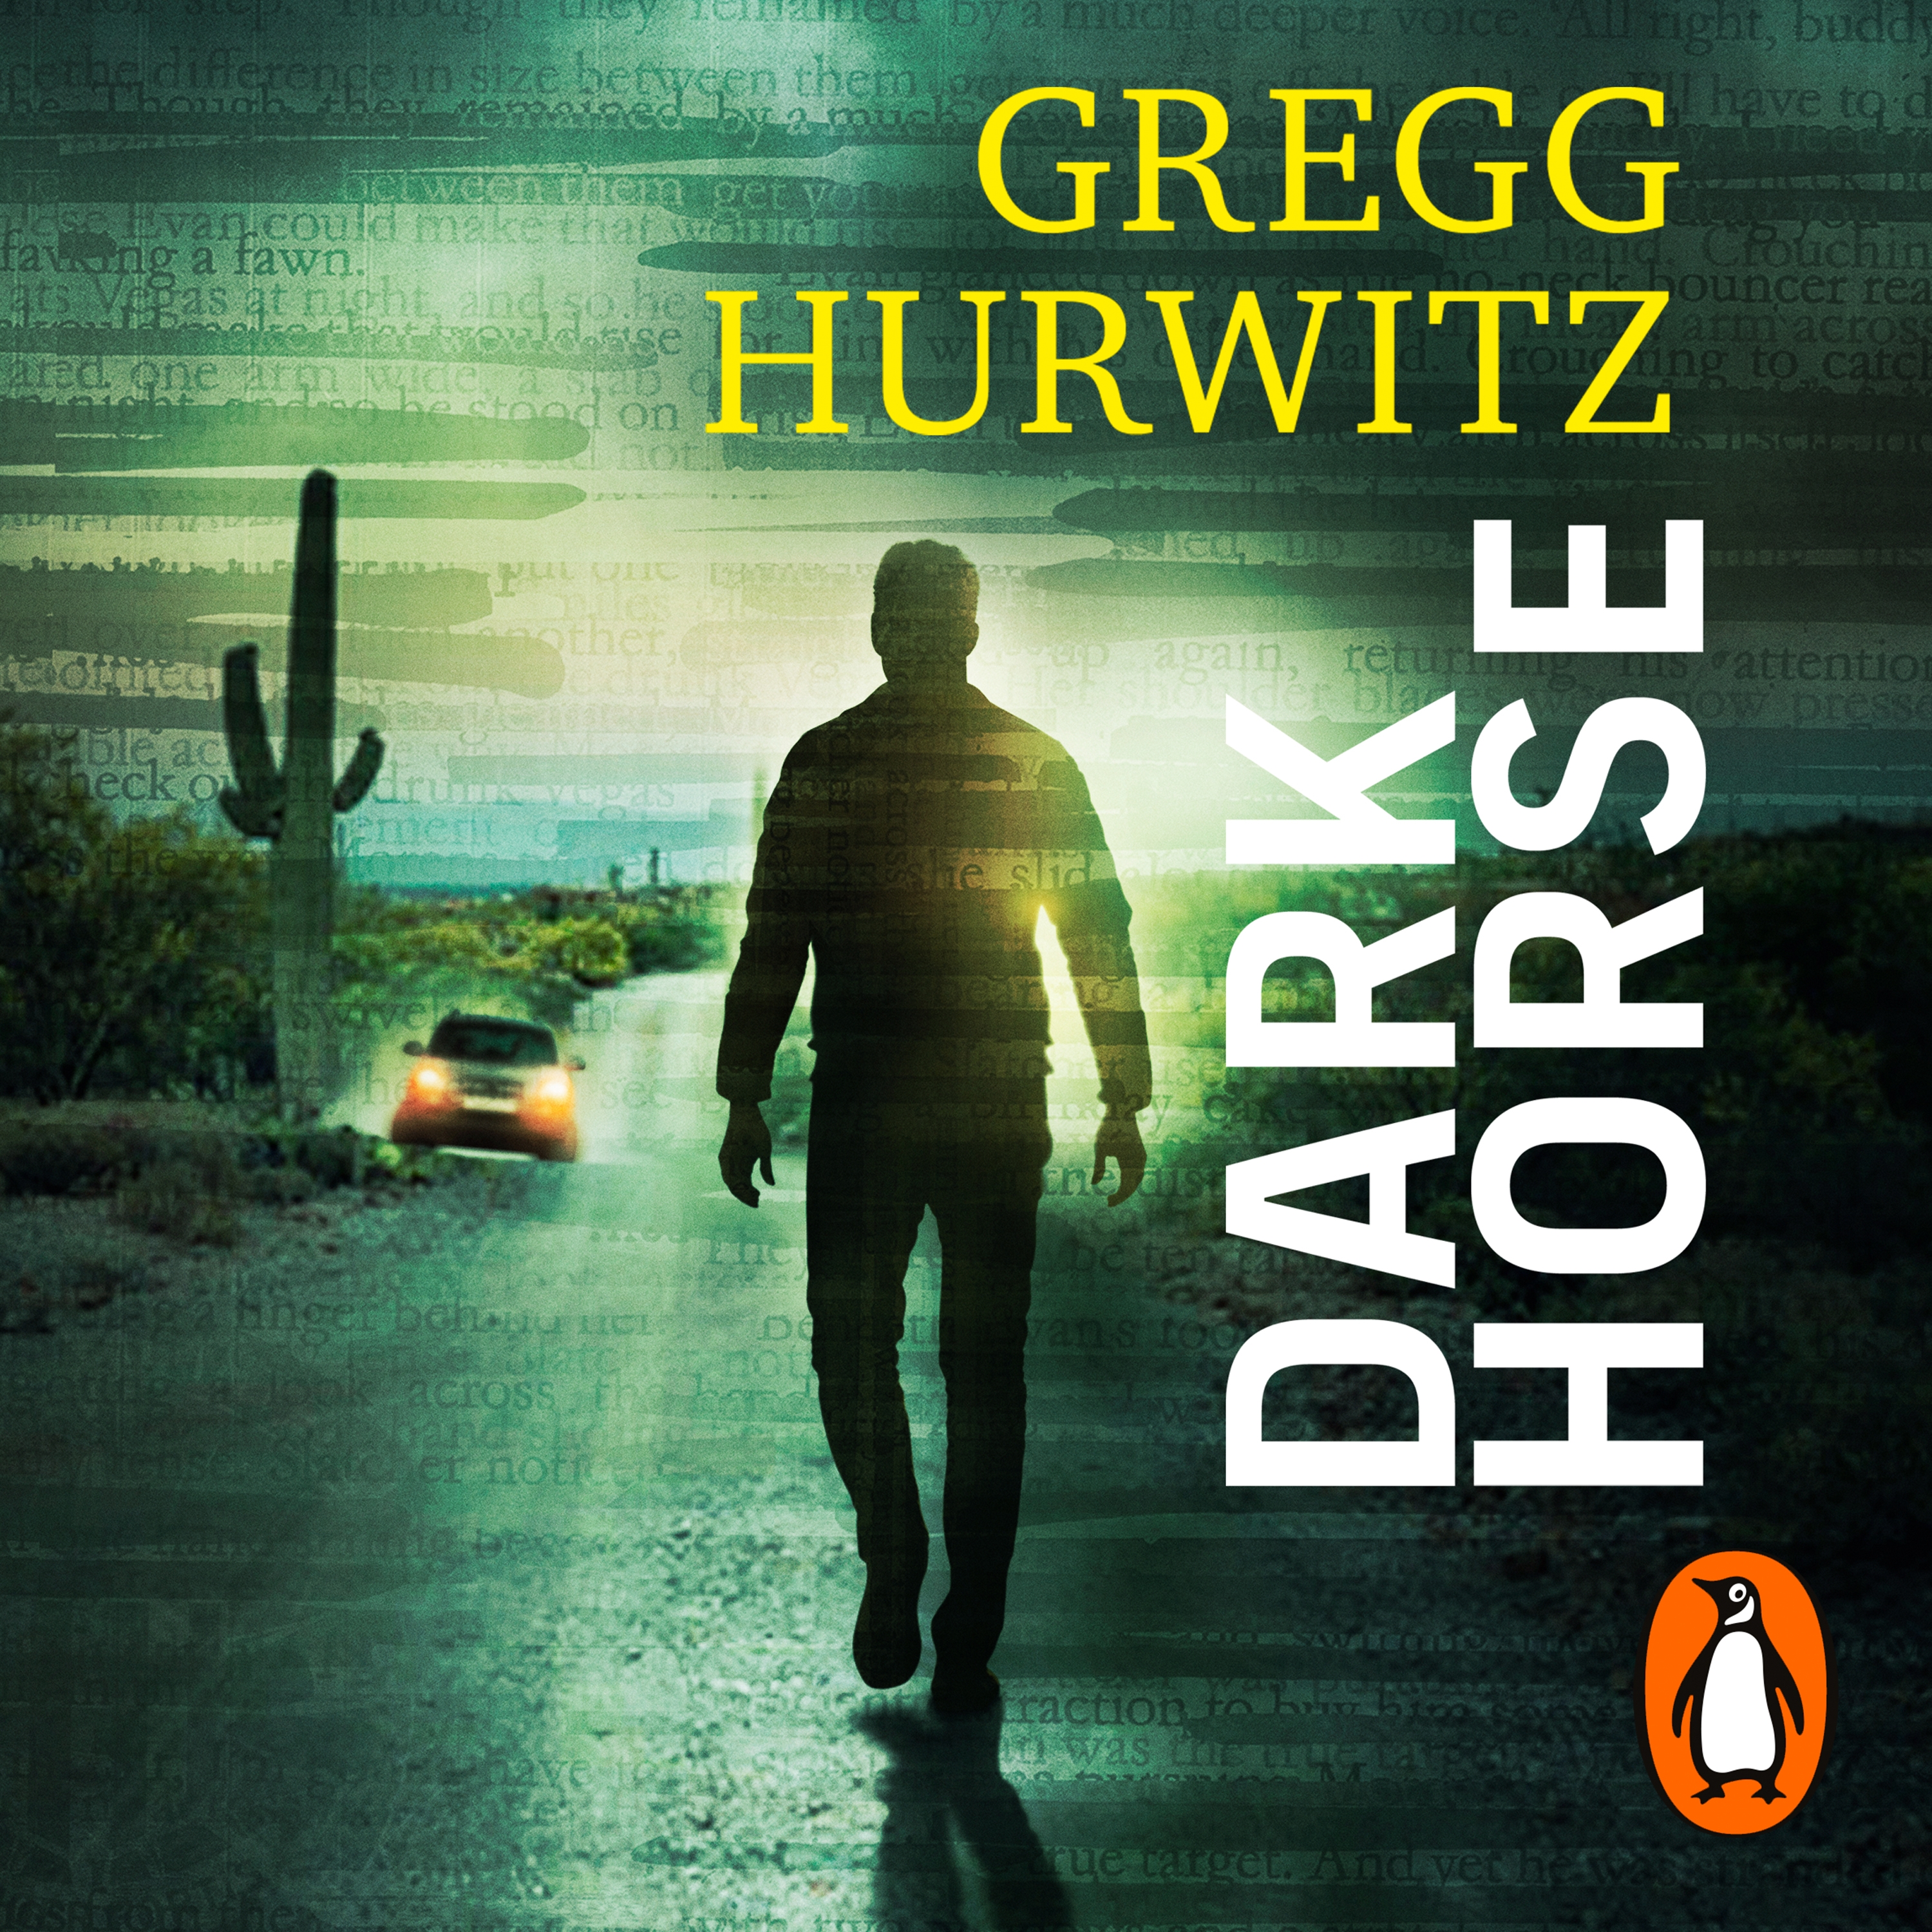 The Cover of Dark Horse by Gregg Hurwitz. A man walks along a desert road, with a car parked on the sideline and cactus in the distance. The author's name is aligned to the right in yellow, and the title is stacked vertically up the right hand side of the cover in white.